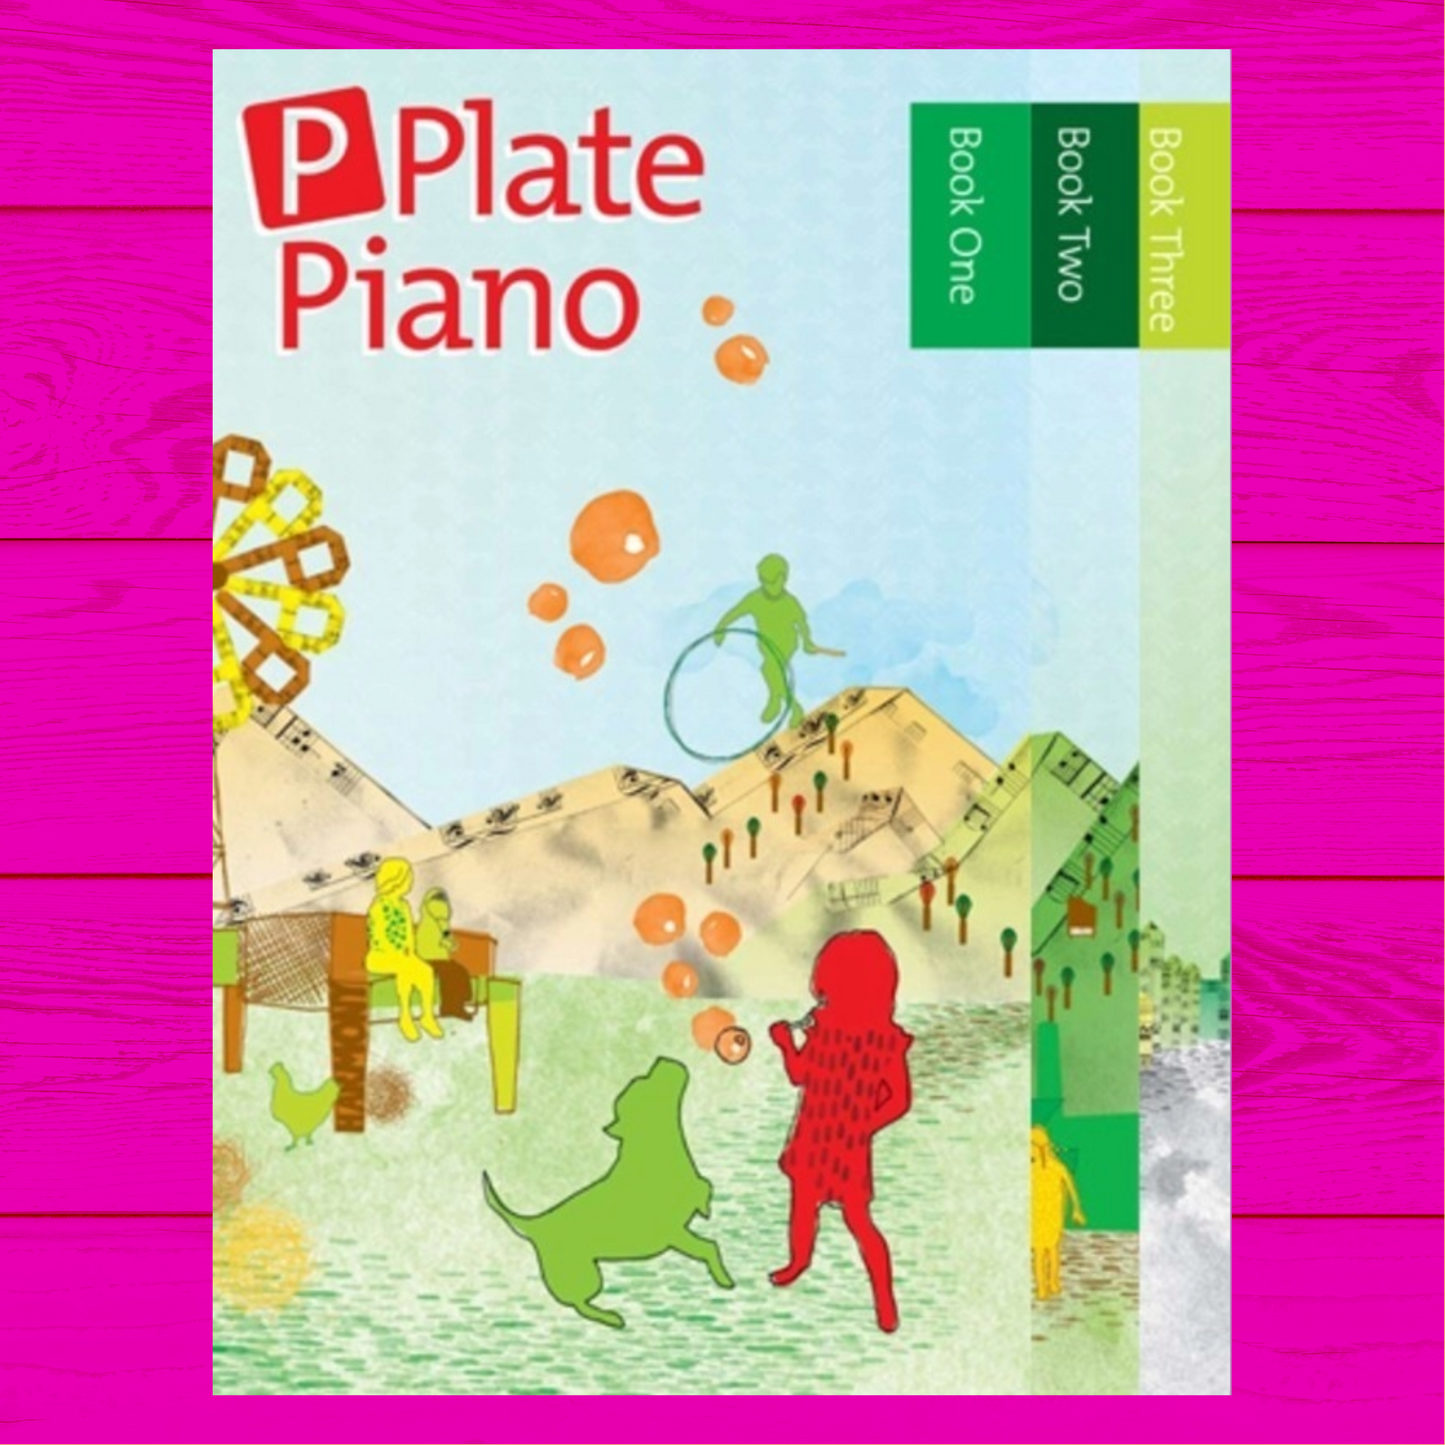 AMEB P Plate Piano Complete Pack - Books 1 to 3